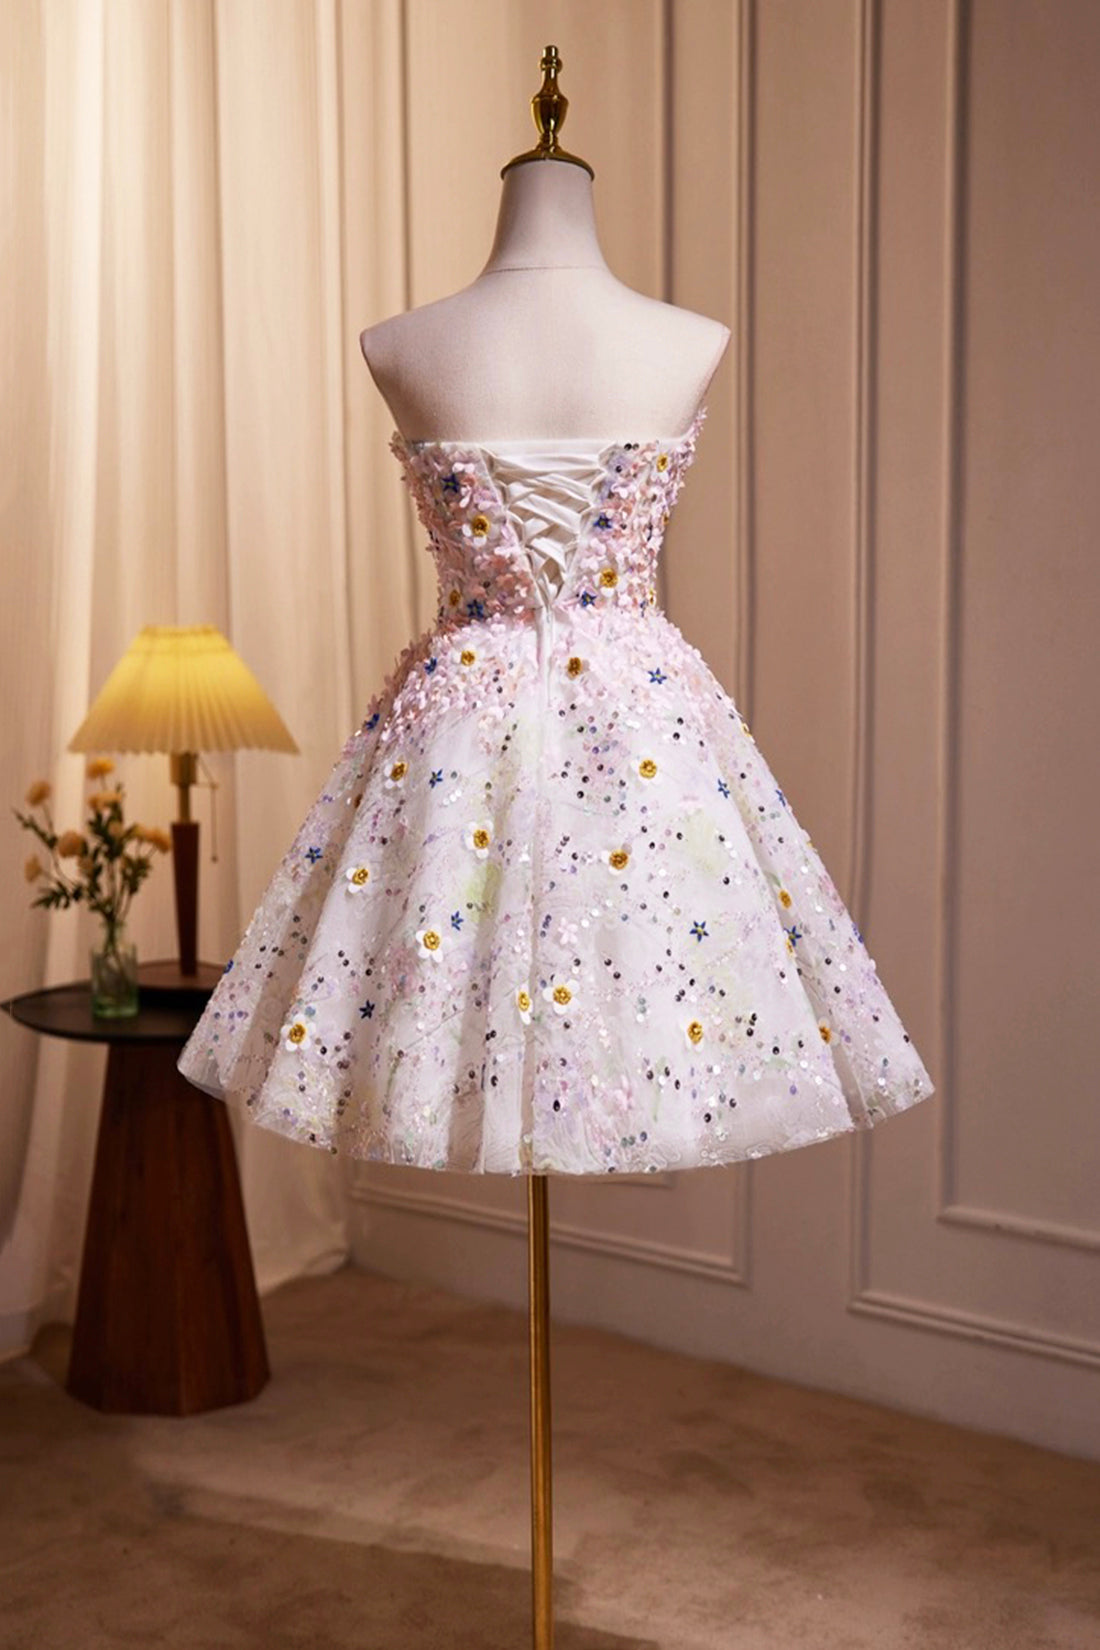 Cute 3D Floral Knee Length Party Dress, A-line Strapless Homecoming Dress